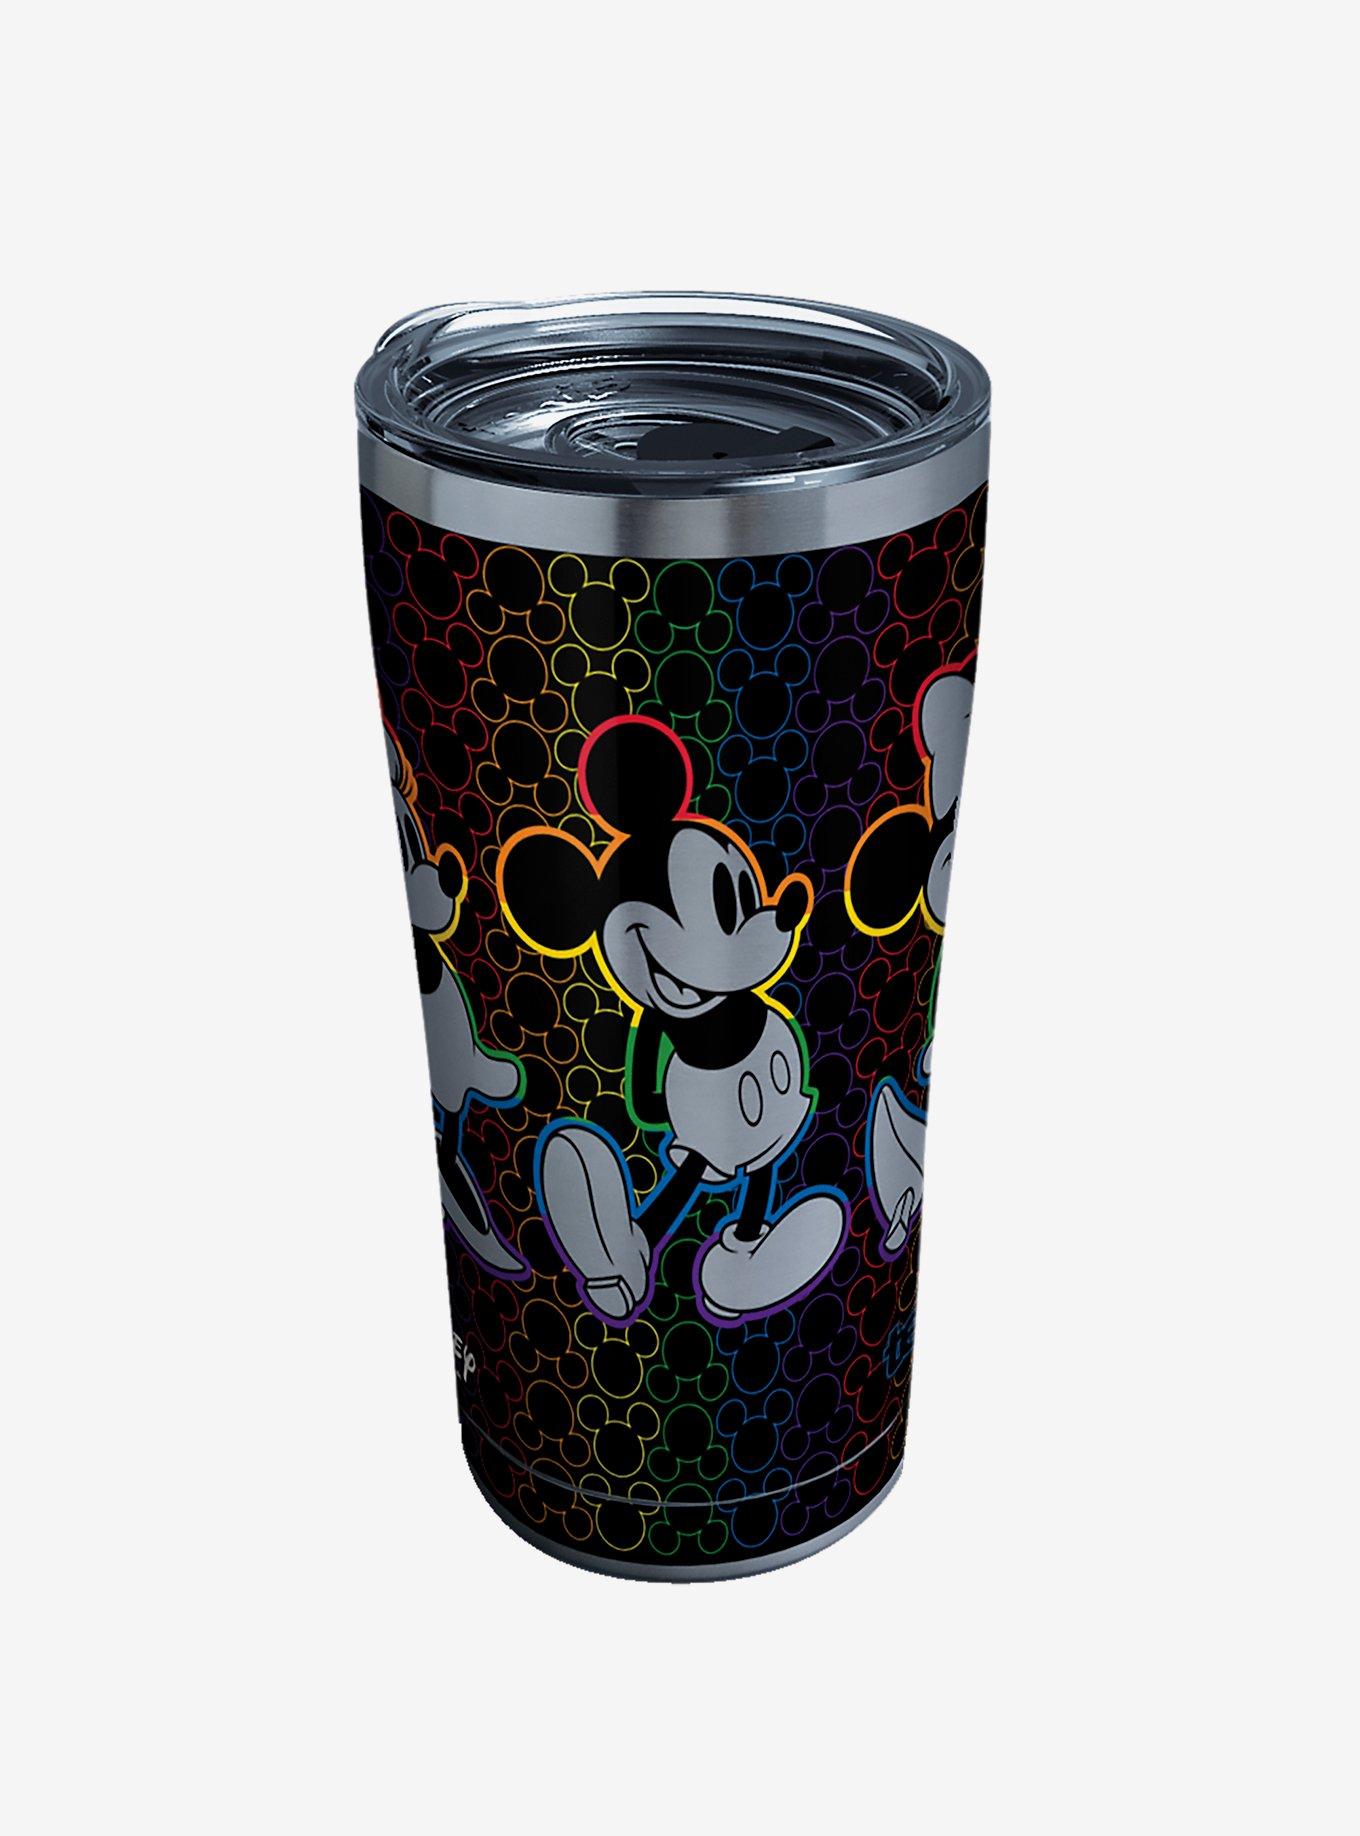 Disney Mickey Mouse 20 oz. Vacuum-Insulated Stainless Steel